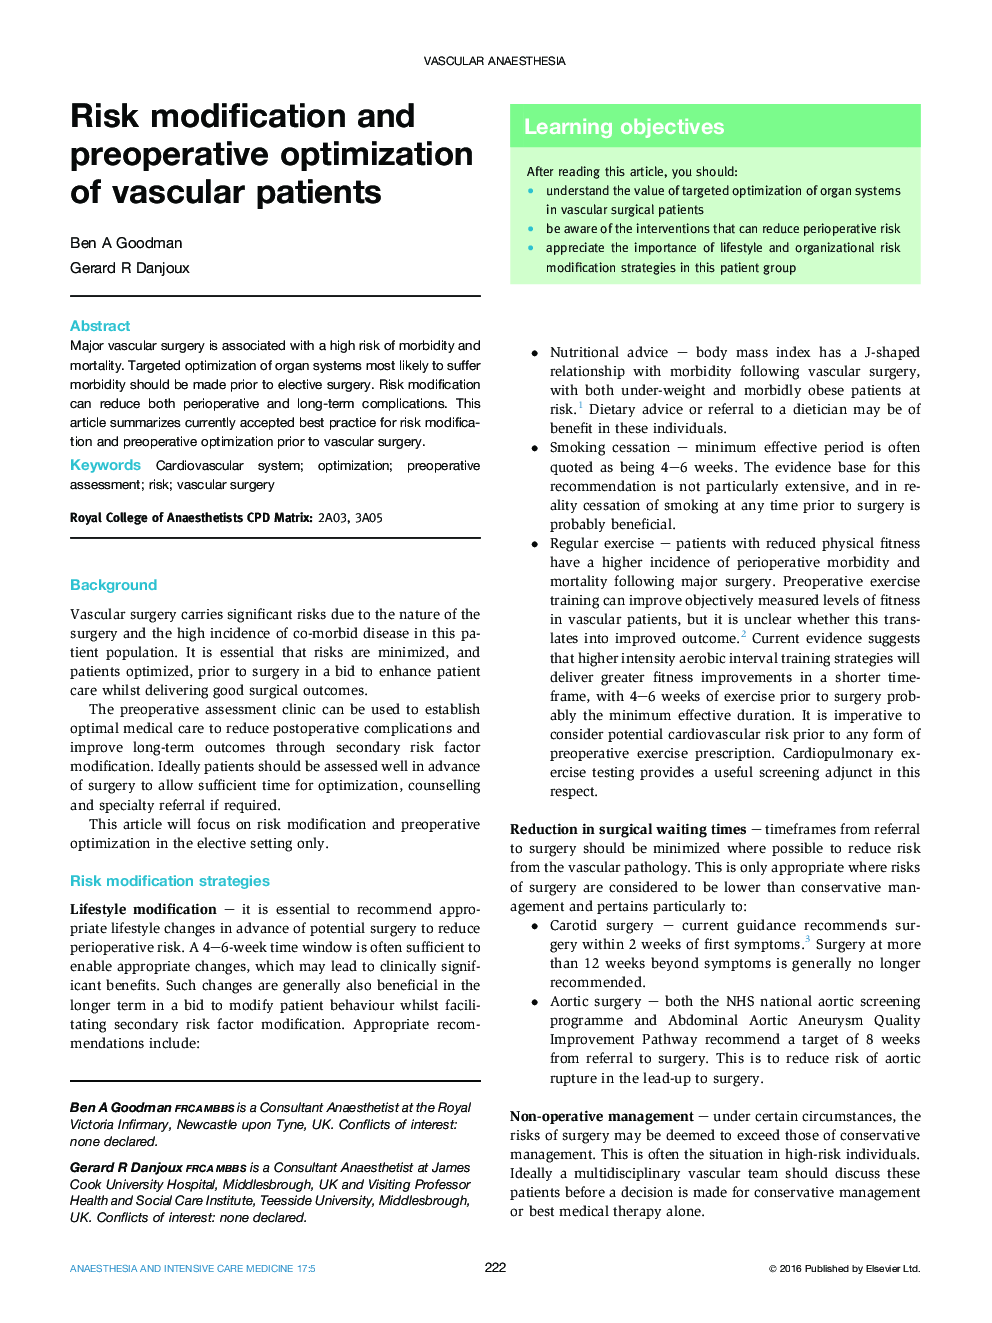 Risk modification and preoperative optimization of vascular patients